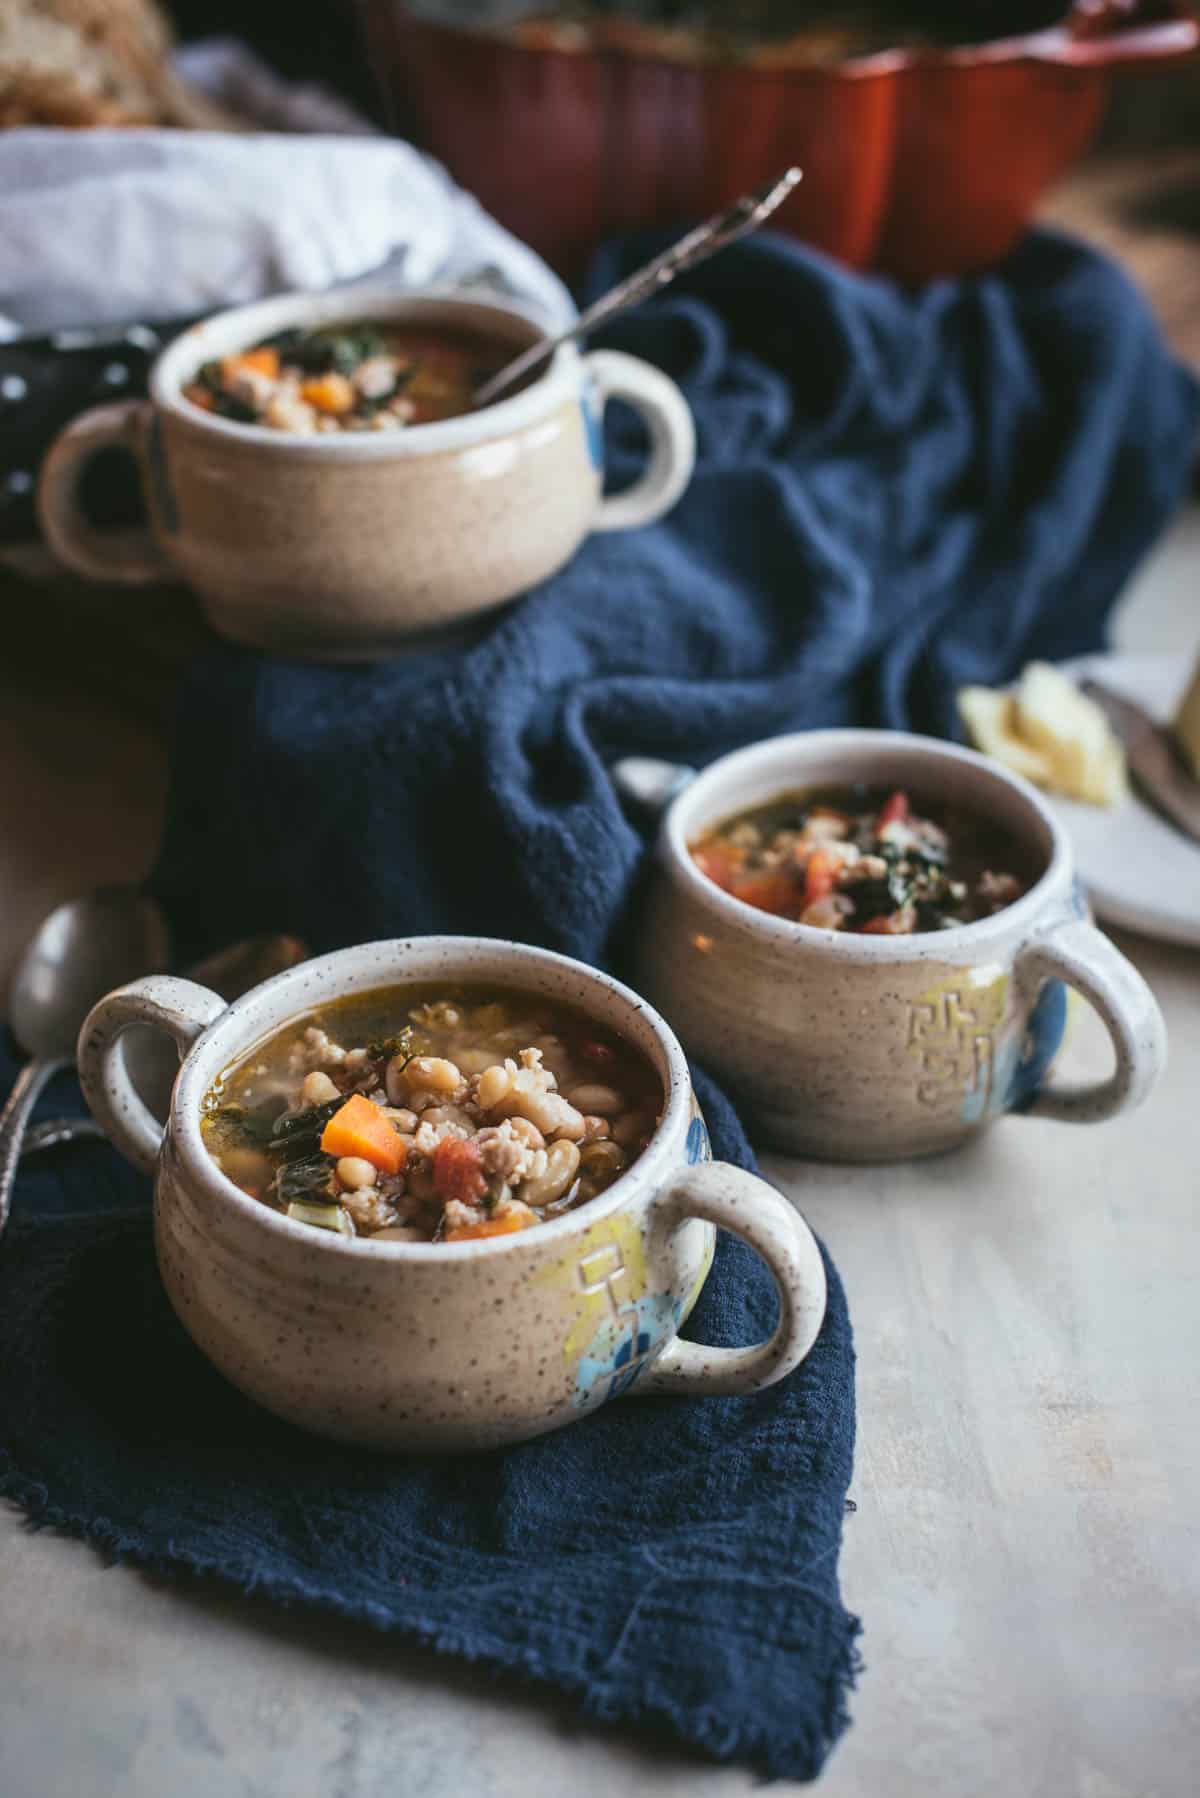 A blue dish towel is on a grey counter, on top of the cloth are white bowls with handles, they are filled with sausage bean and kale soup. There are some spoons left on the counter.